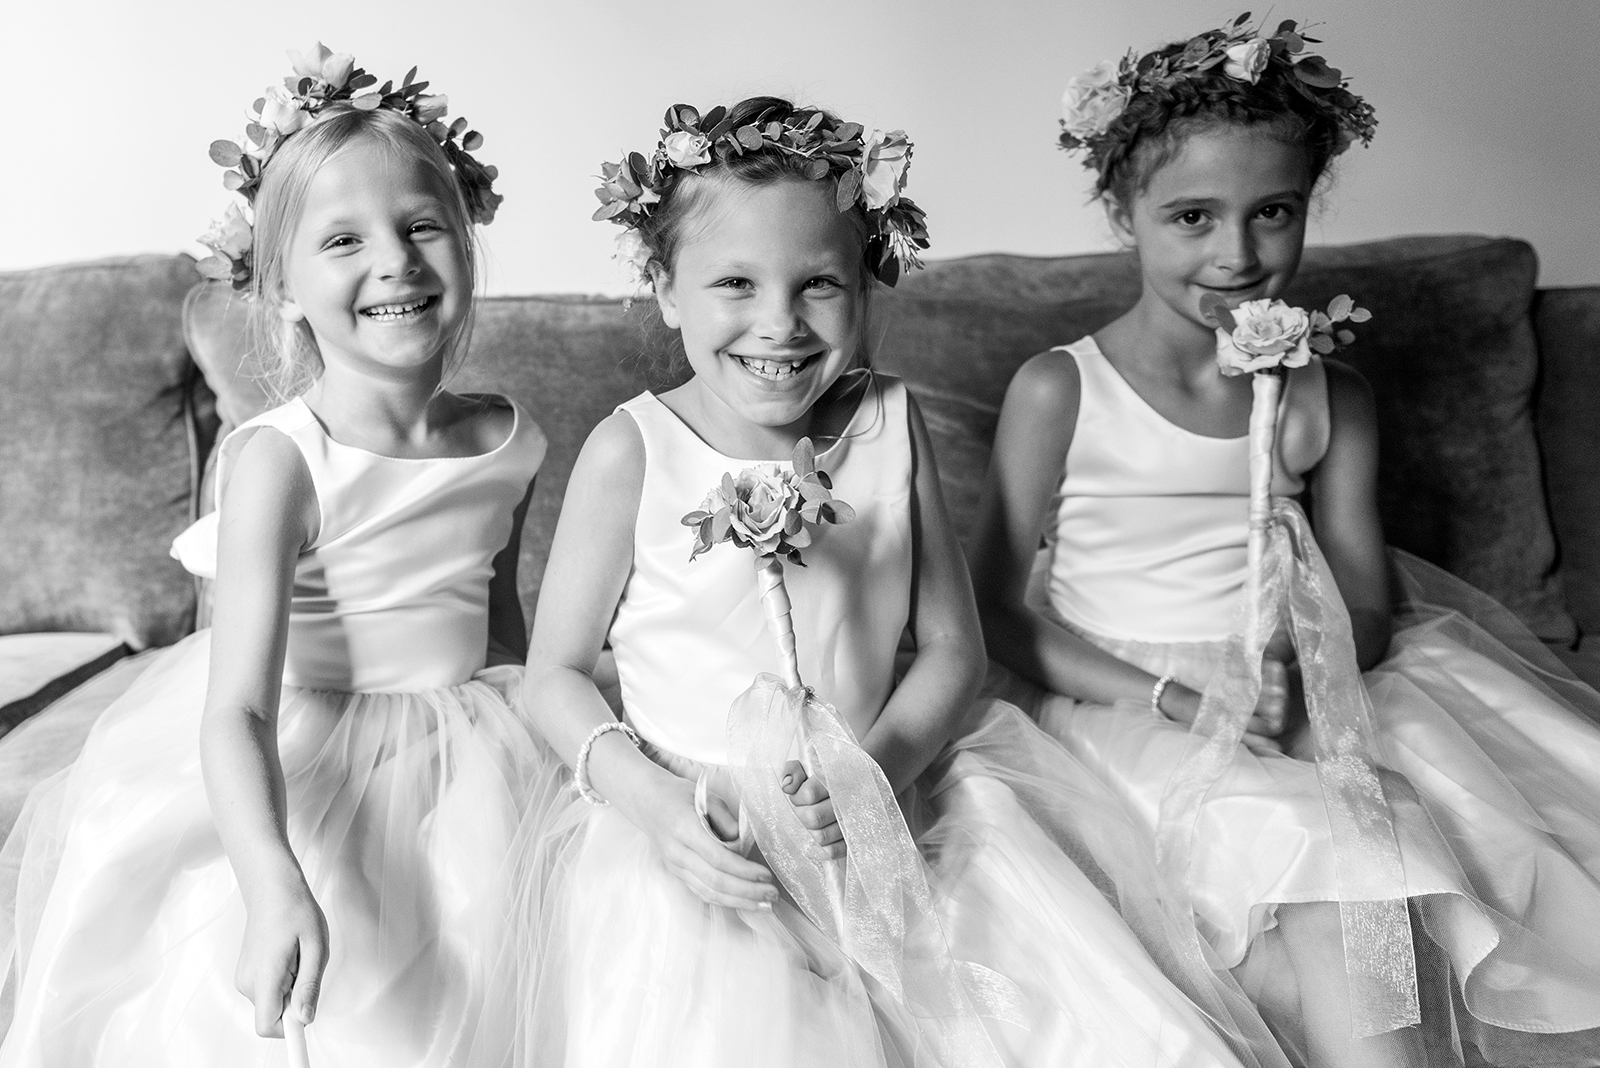 Flowergirls pic in Black and White